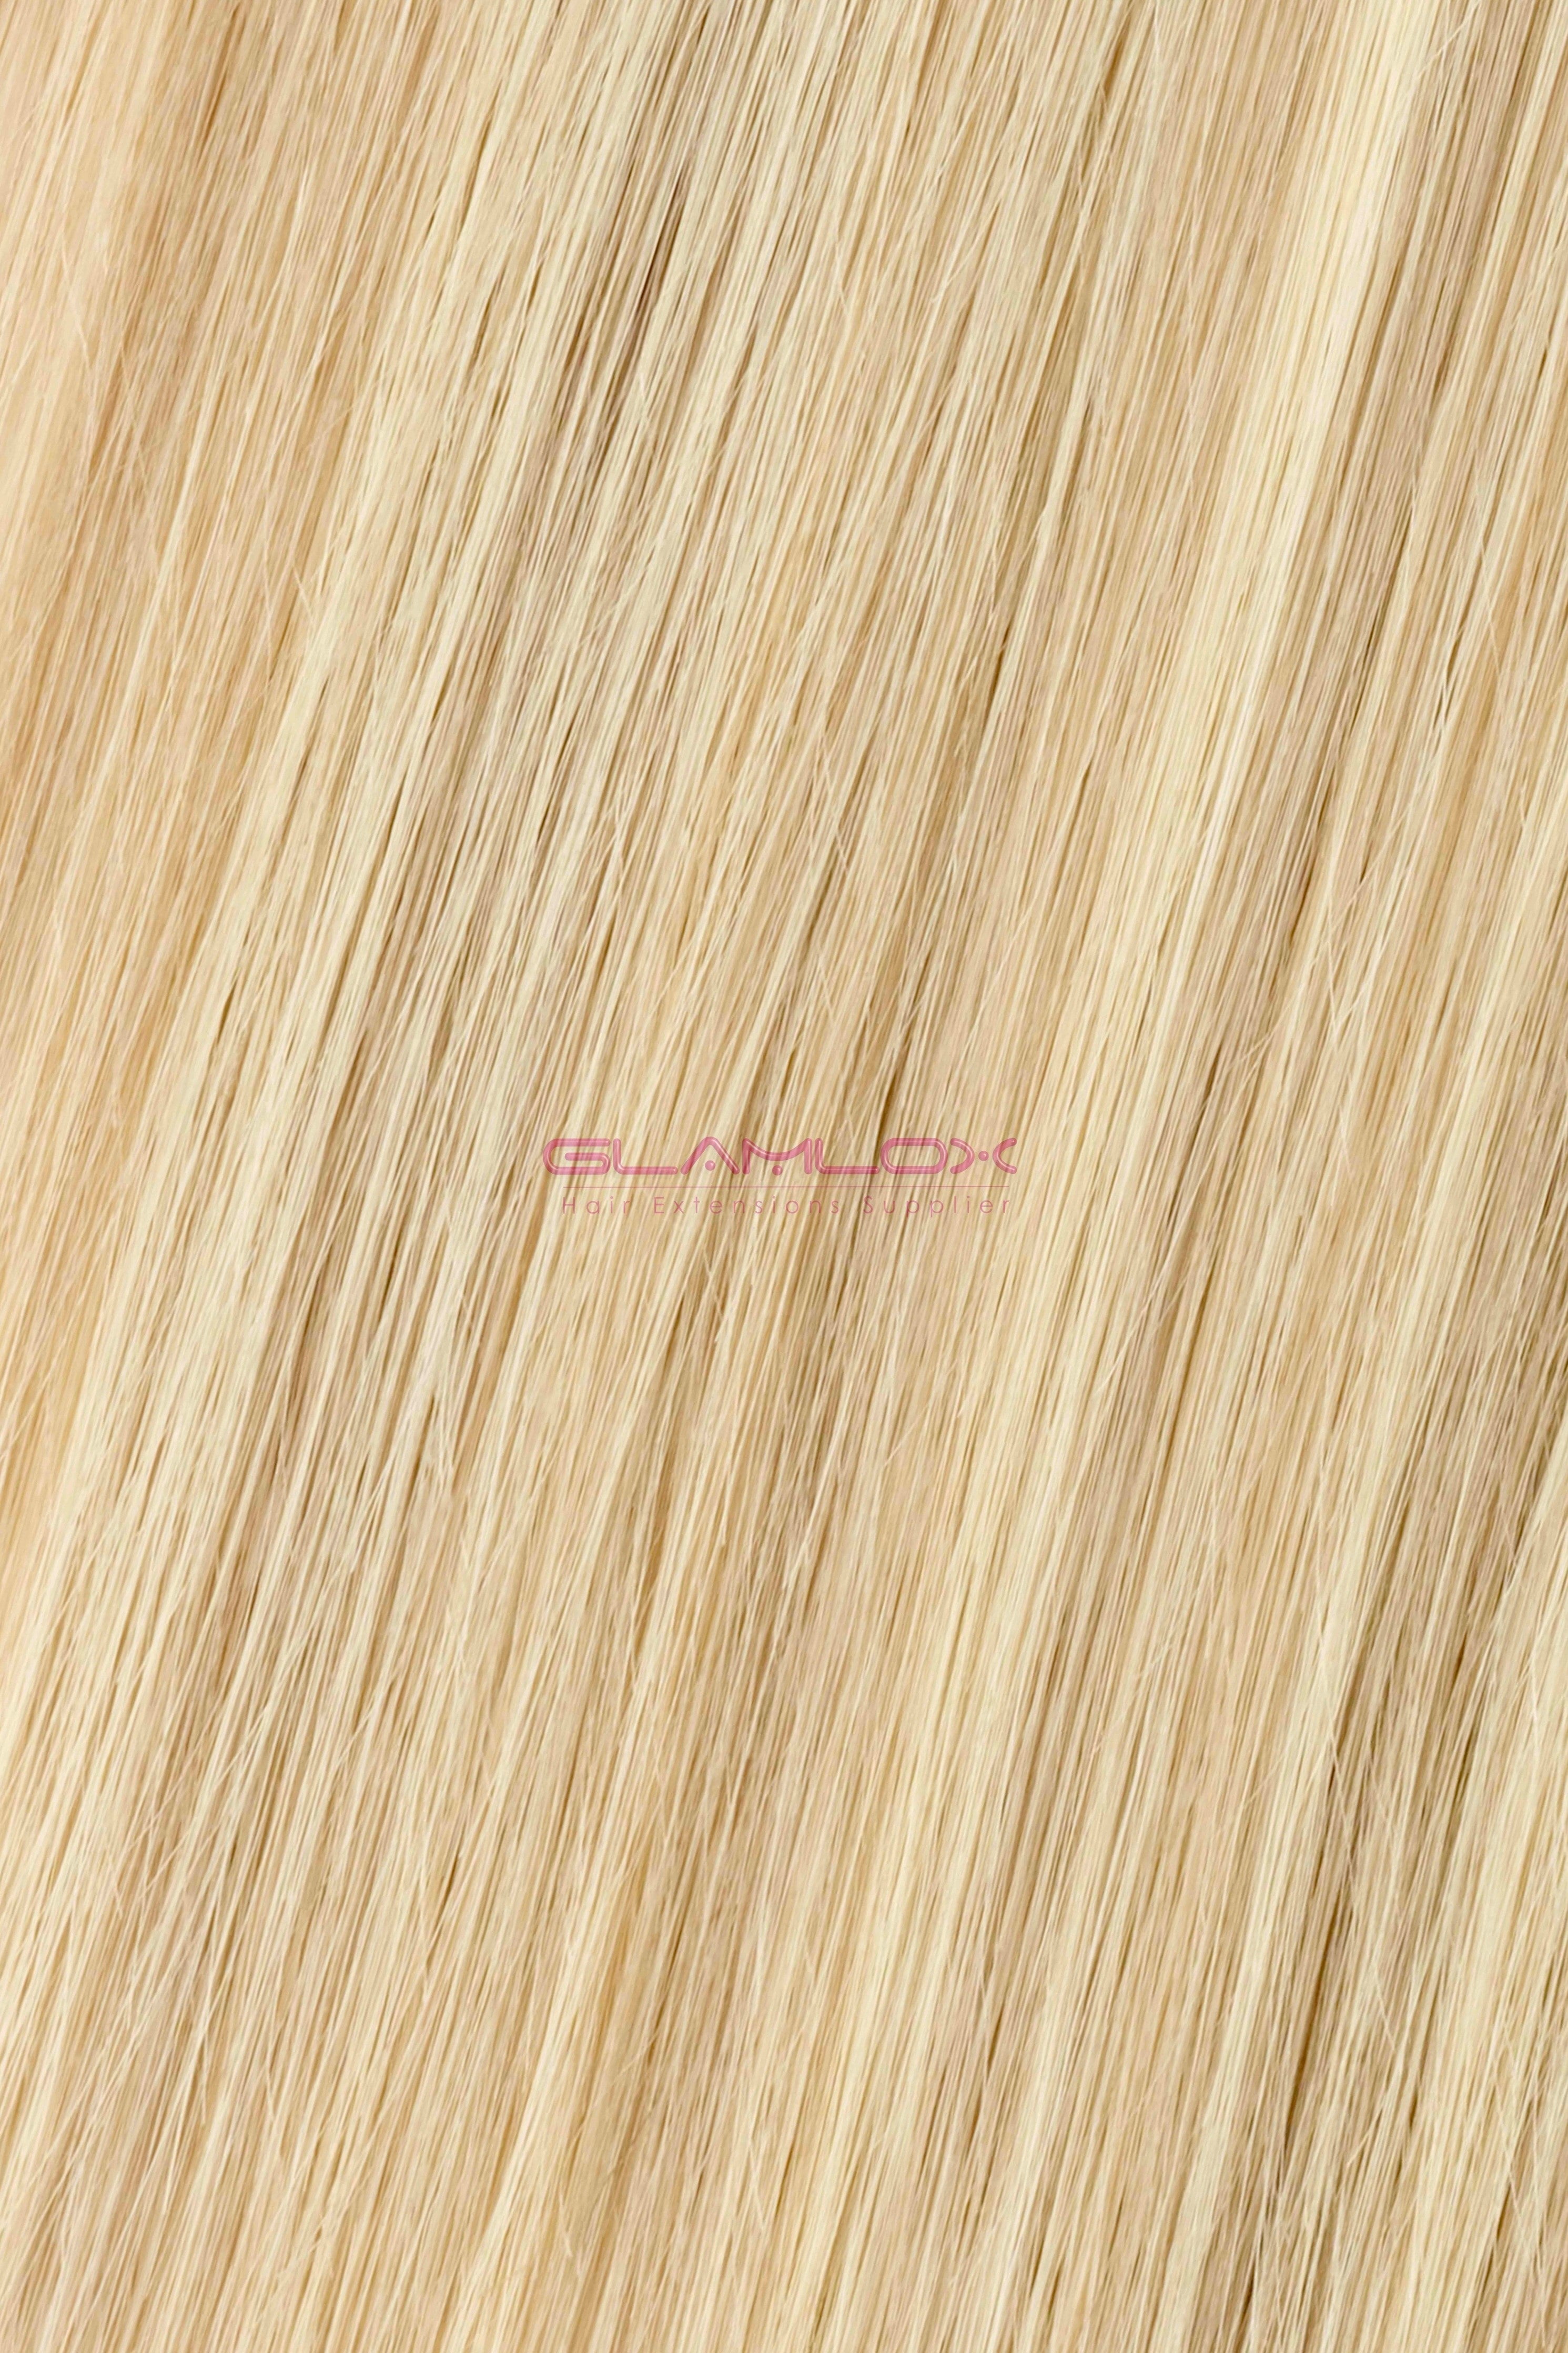 18" - 19" Nano Ring Hair Extensions - Russian Mongolian Double Drawn Remy Human Hair - 100 Strands